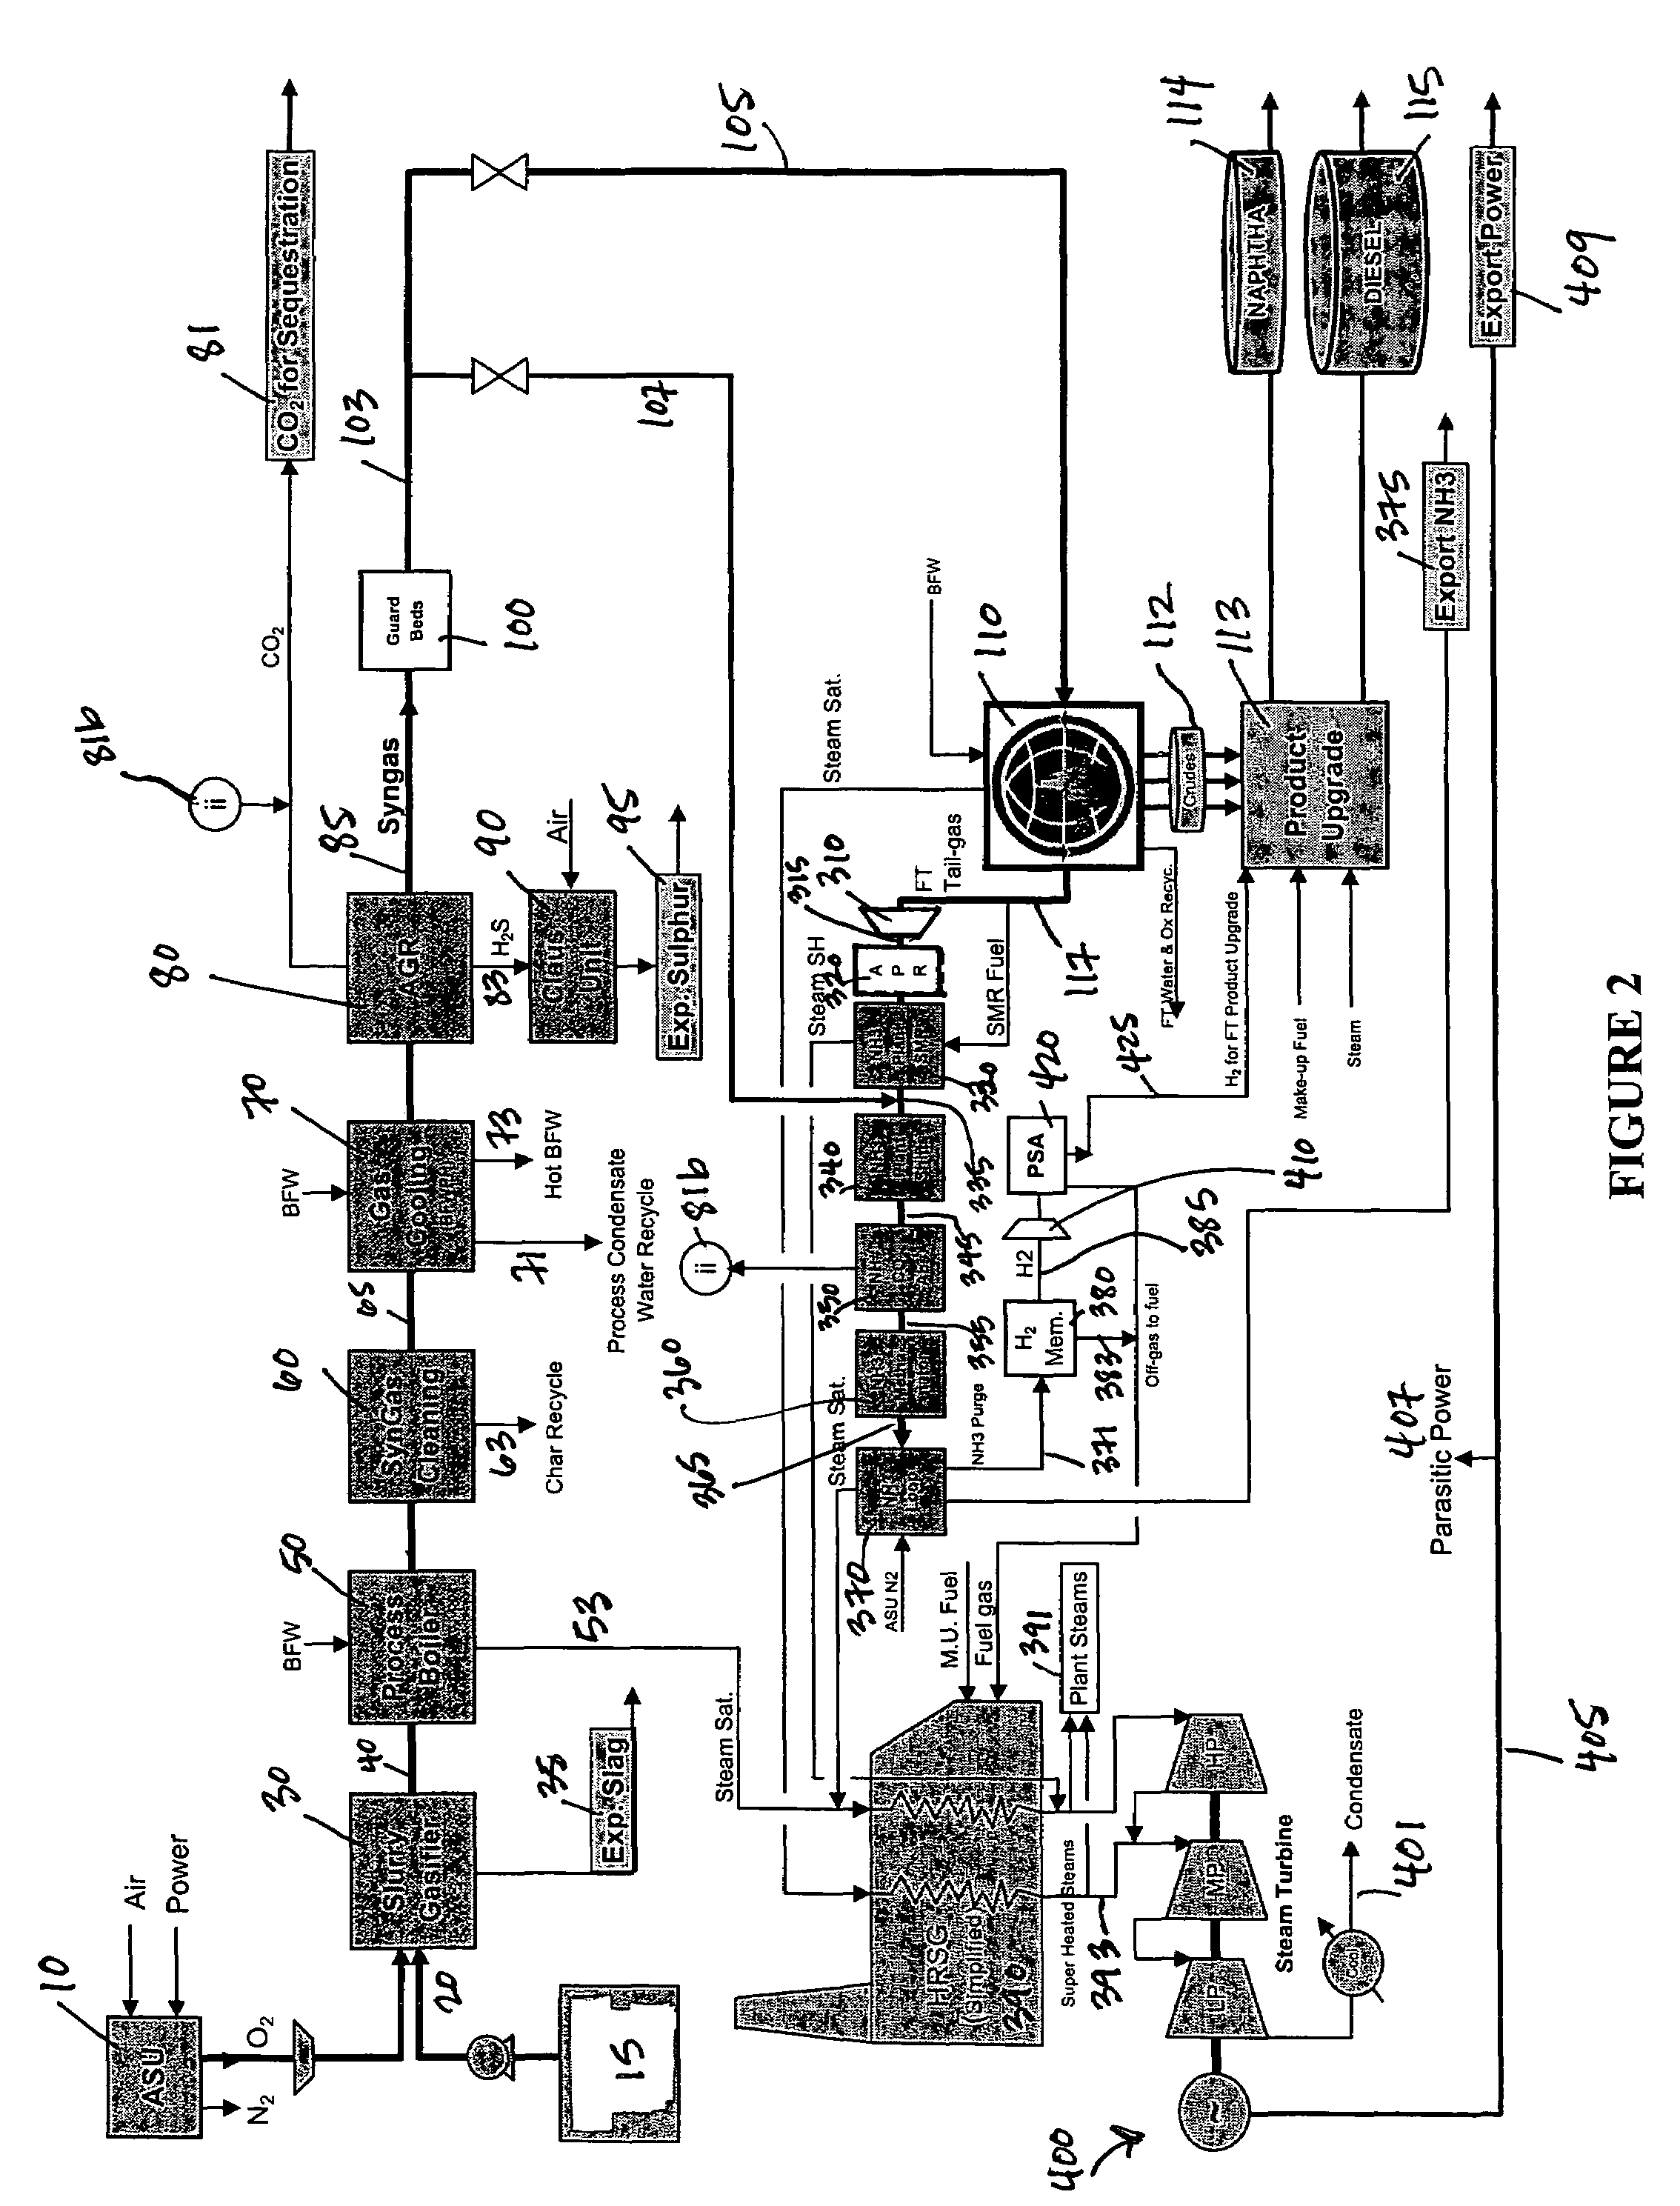 Process for the production of ammonia and Fischer-Tropsch liquids